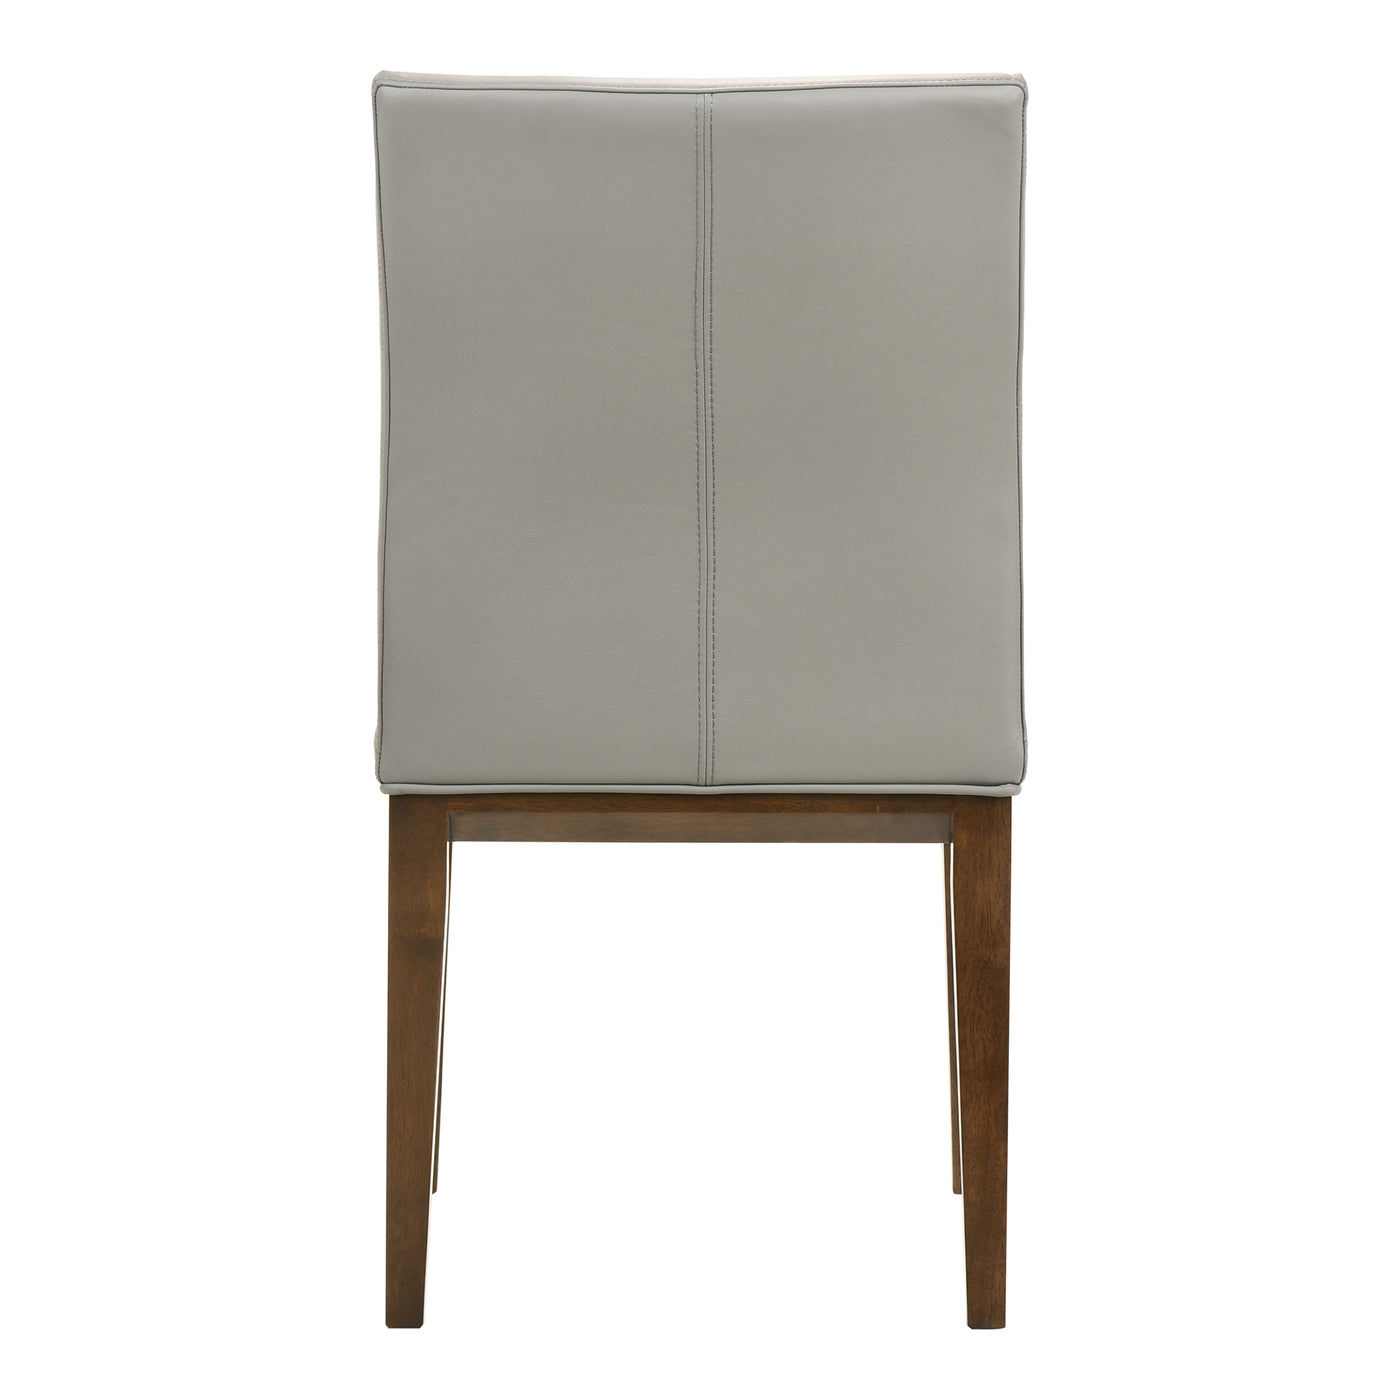 Sleek lines, modern curves, and a wipe-clean design make this family-friendly dining chair a contemporary fit for any dini...